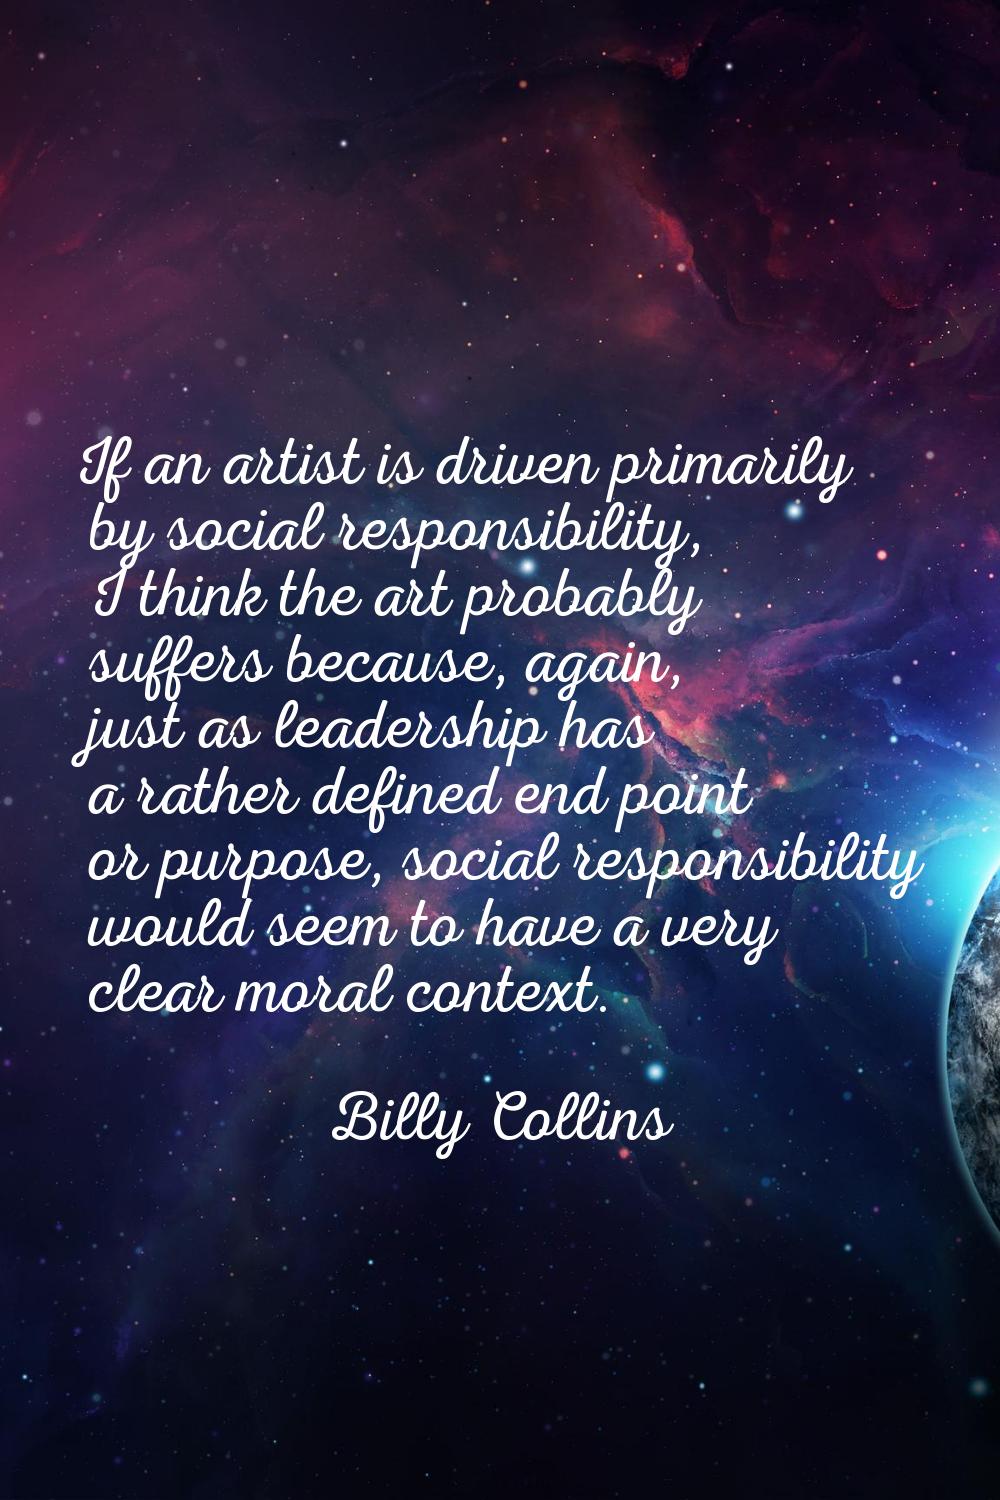 If an artist is driven primarily by social responsibility, I think the art probably suffers because